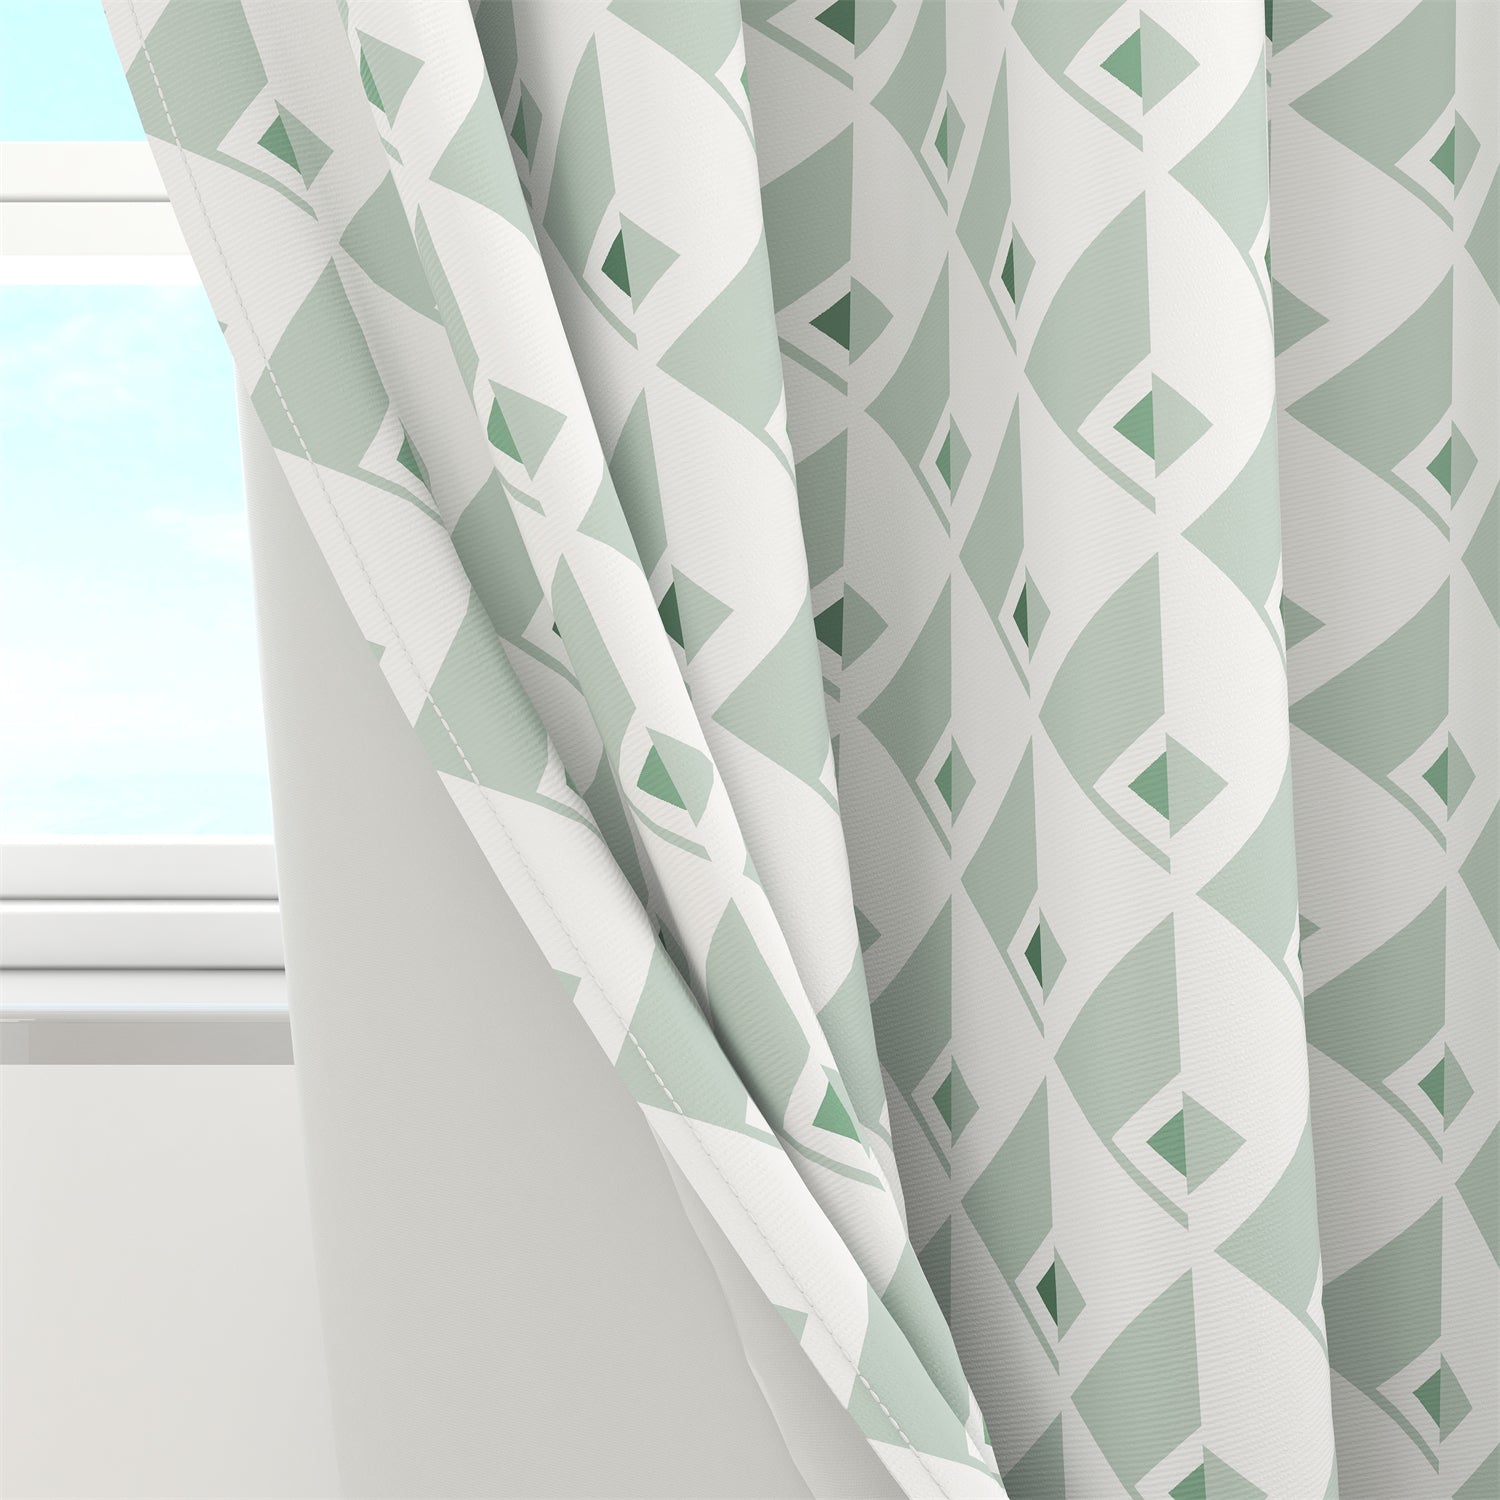 Geometric Grommet Blackout White And Green Curtains For Living Room 2 Panels KGORGE Store